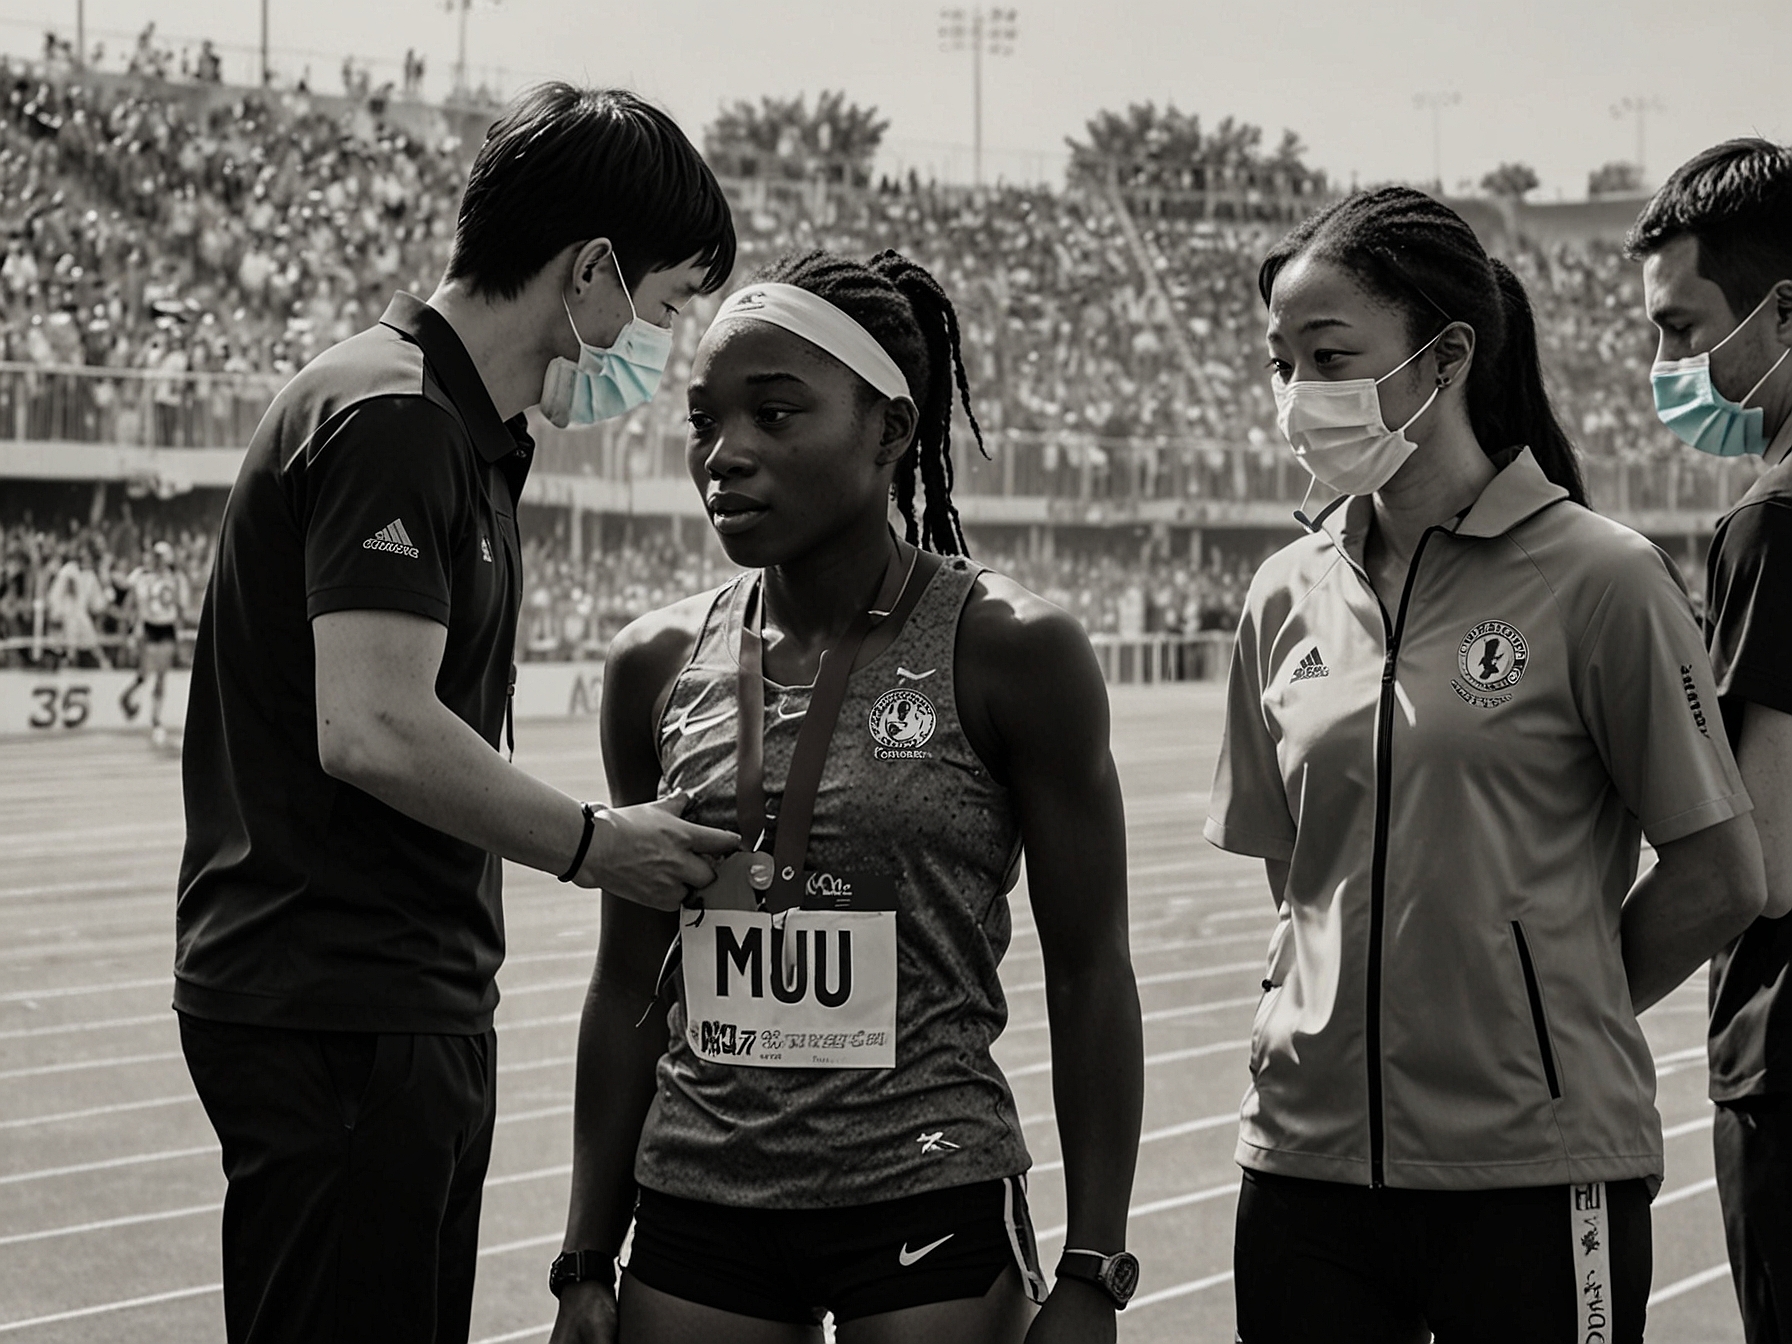 Athing Mu receives support from her coach and team after her fall in the 800-meter final. She shows immense resilience, with medical staff ensuring she is not severely injured.